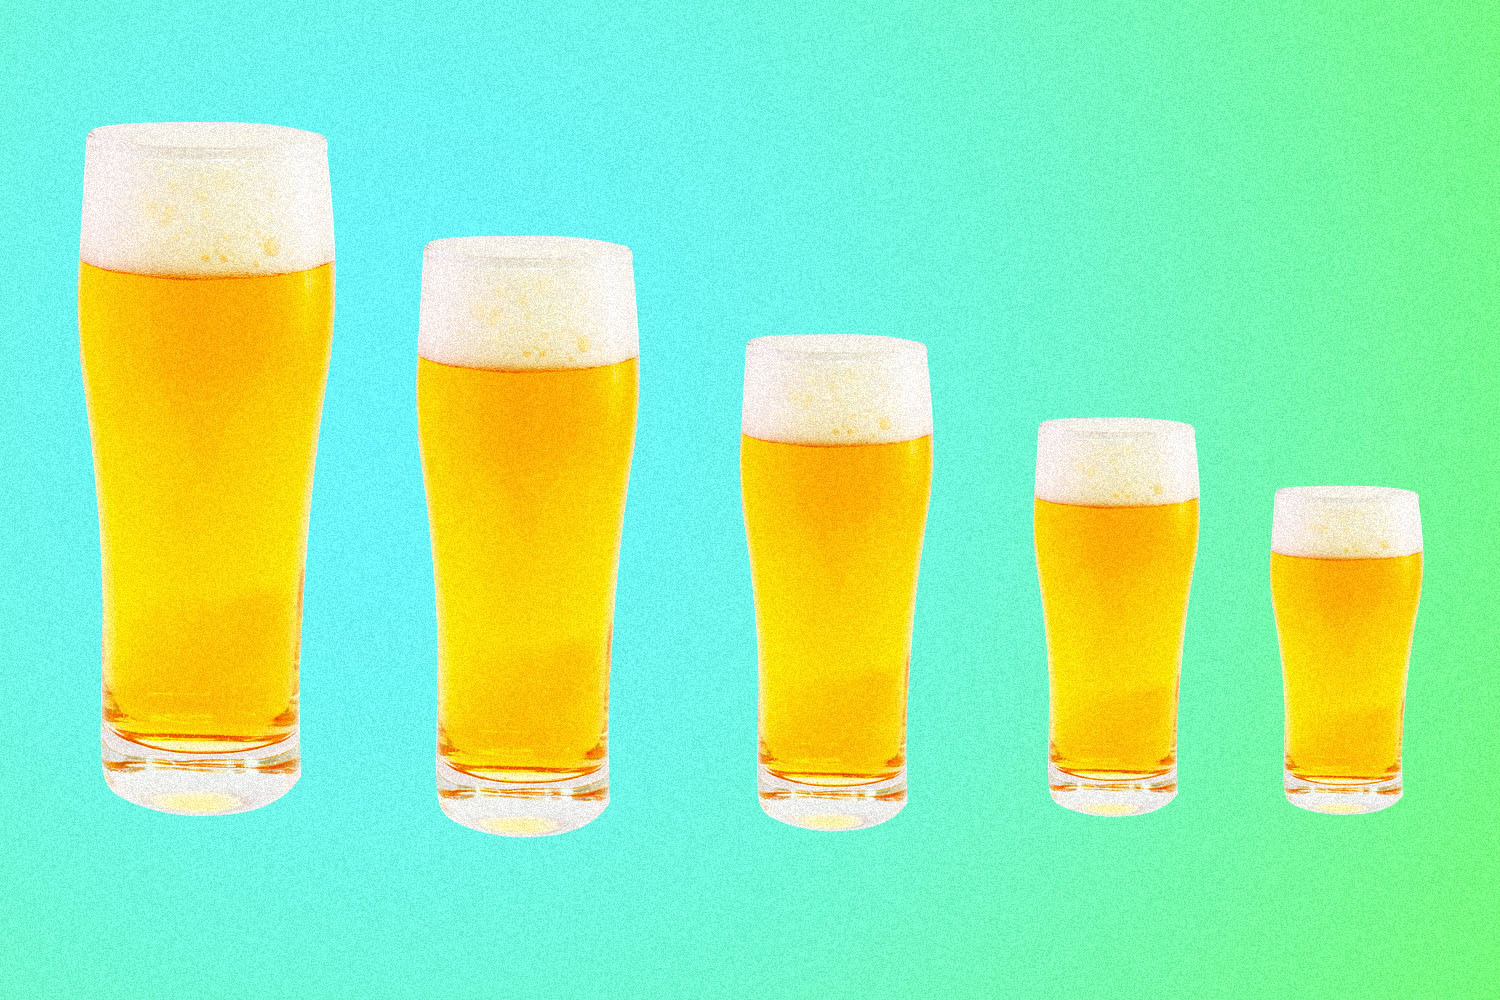 Consider the 2 percent beer